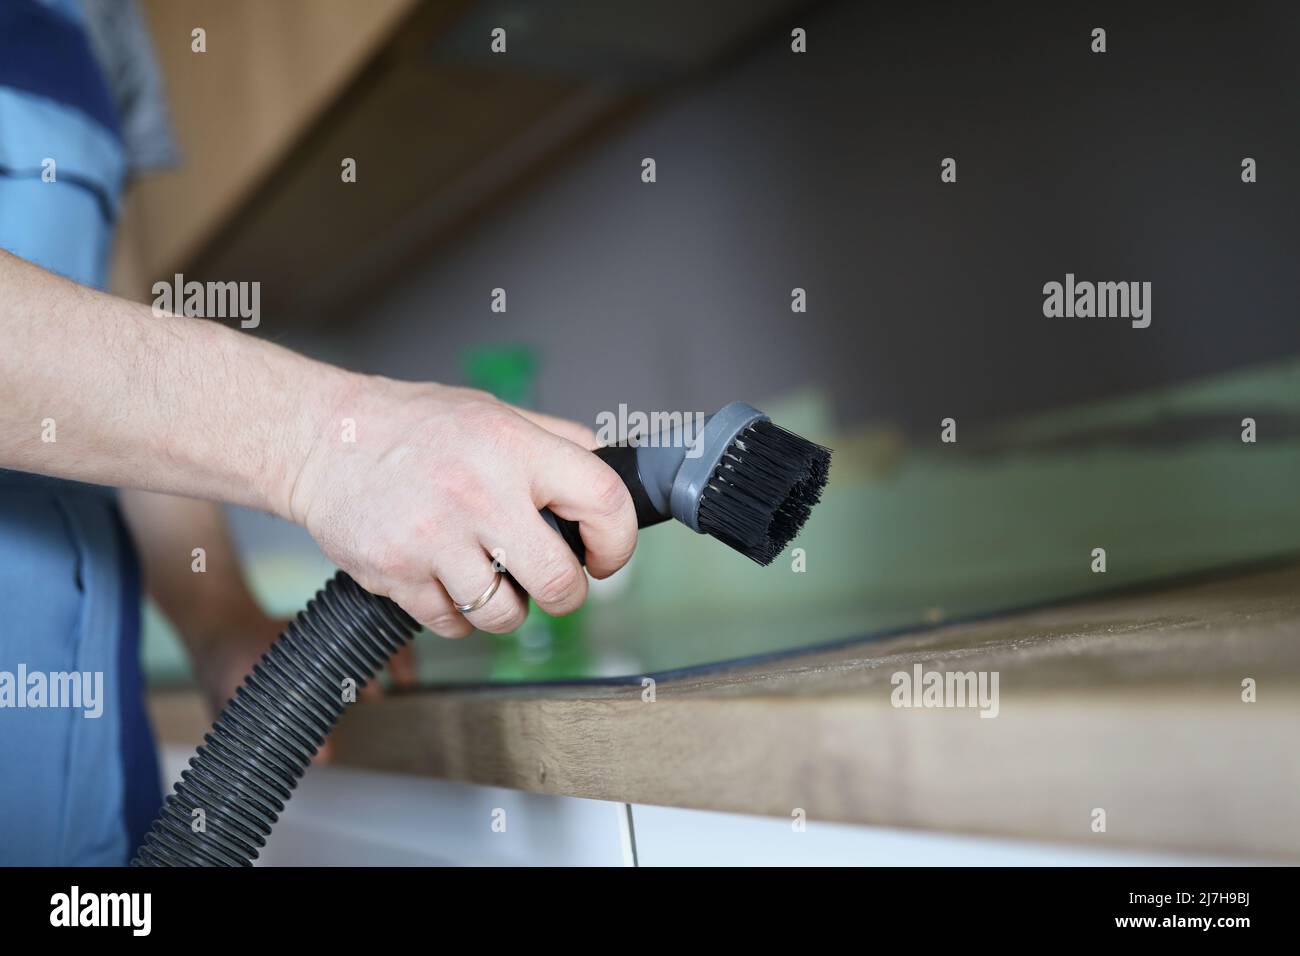 Male worker remove dust with vacuum cleaner, nozzle on cleaning device Stock Photo